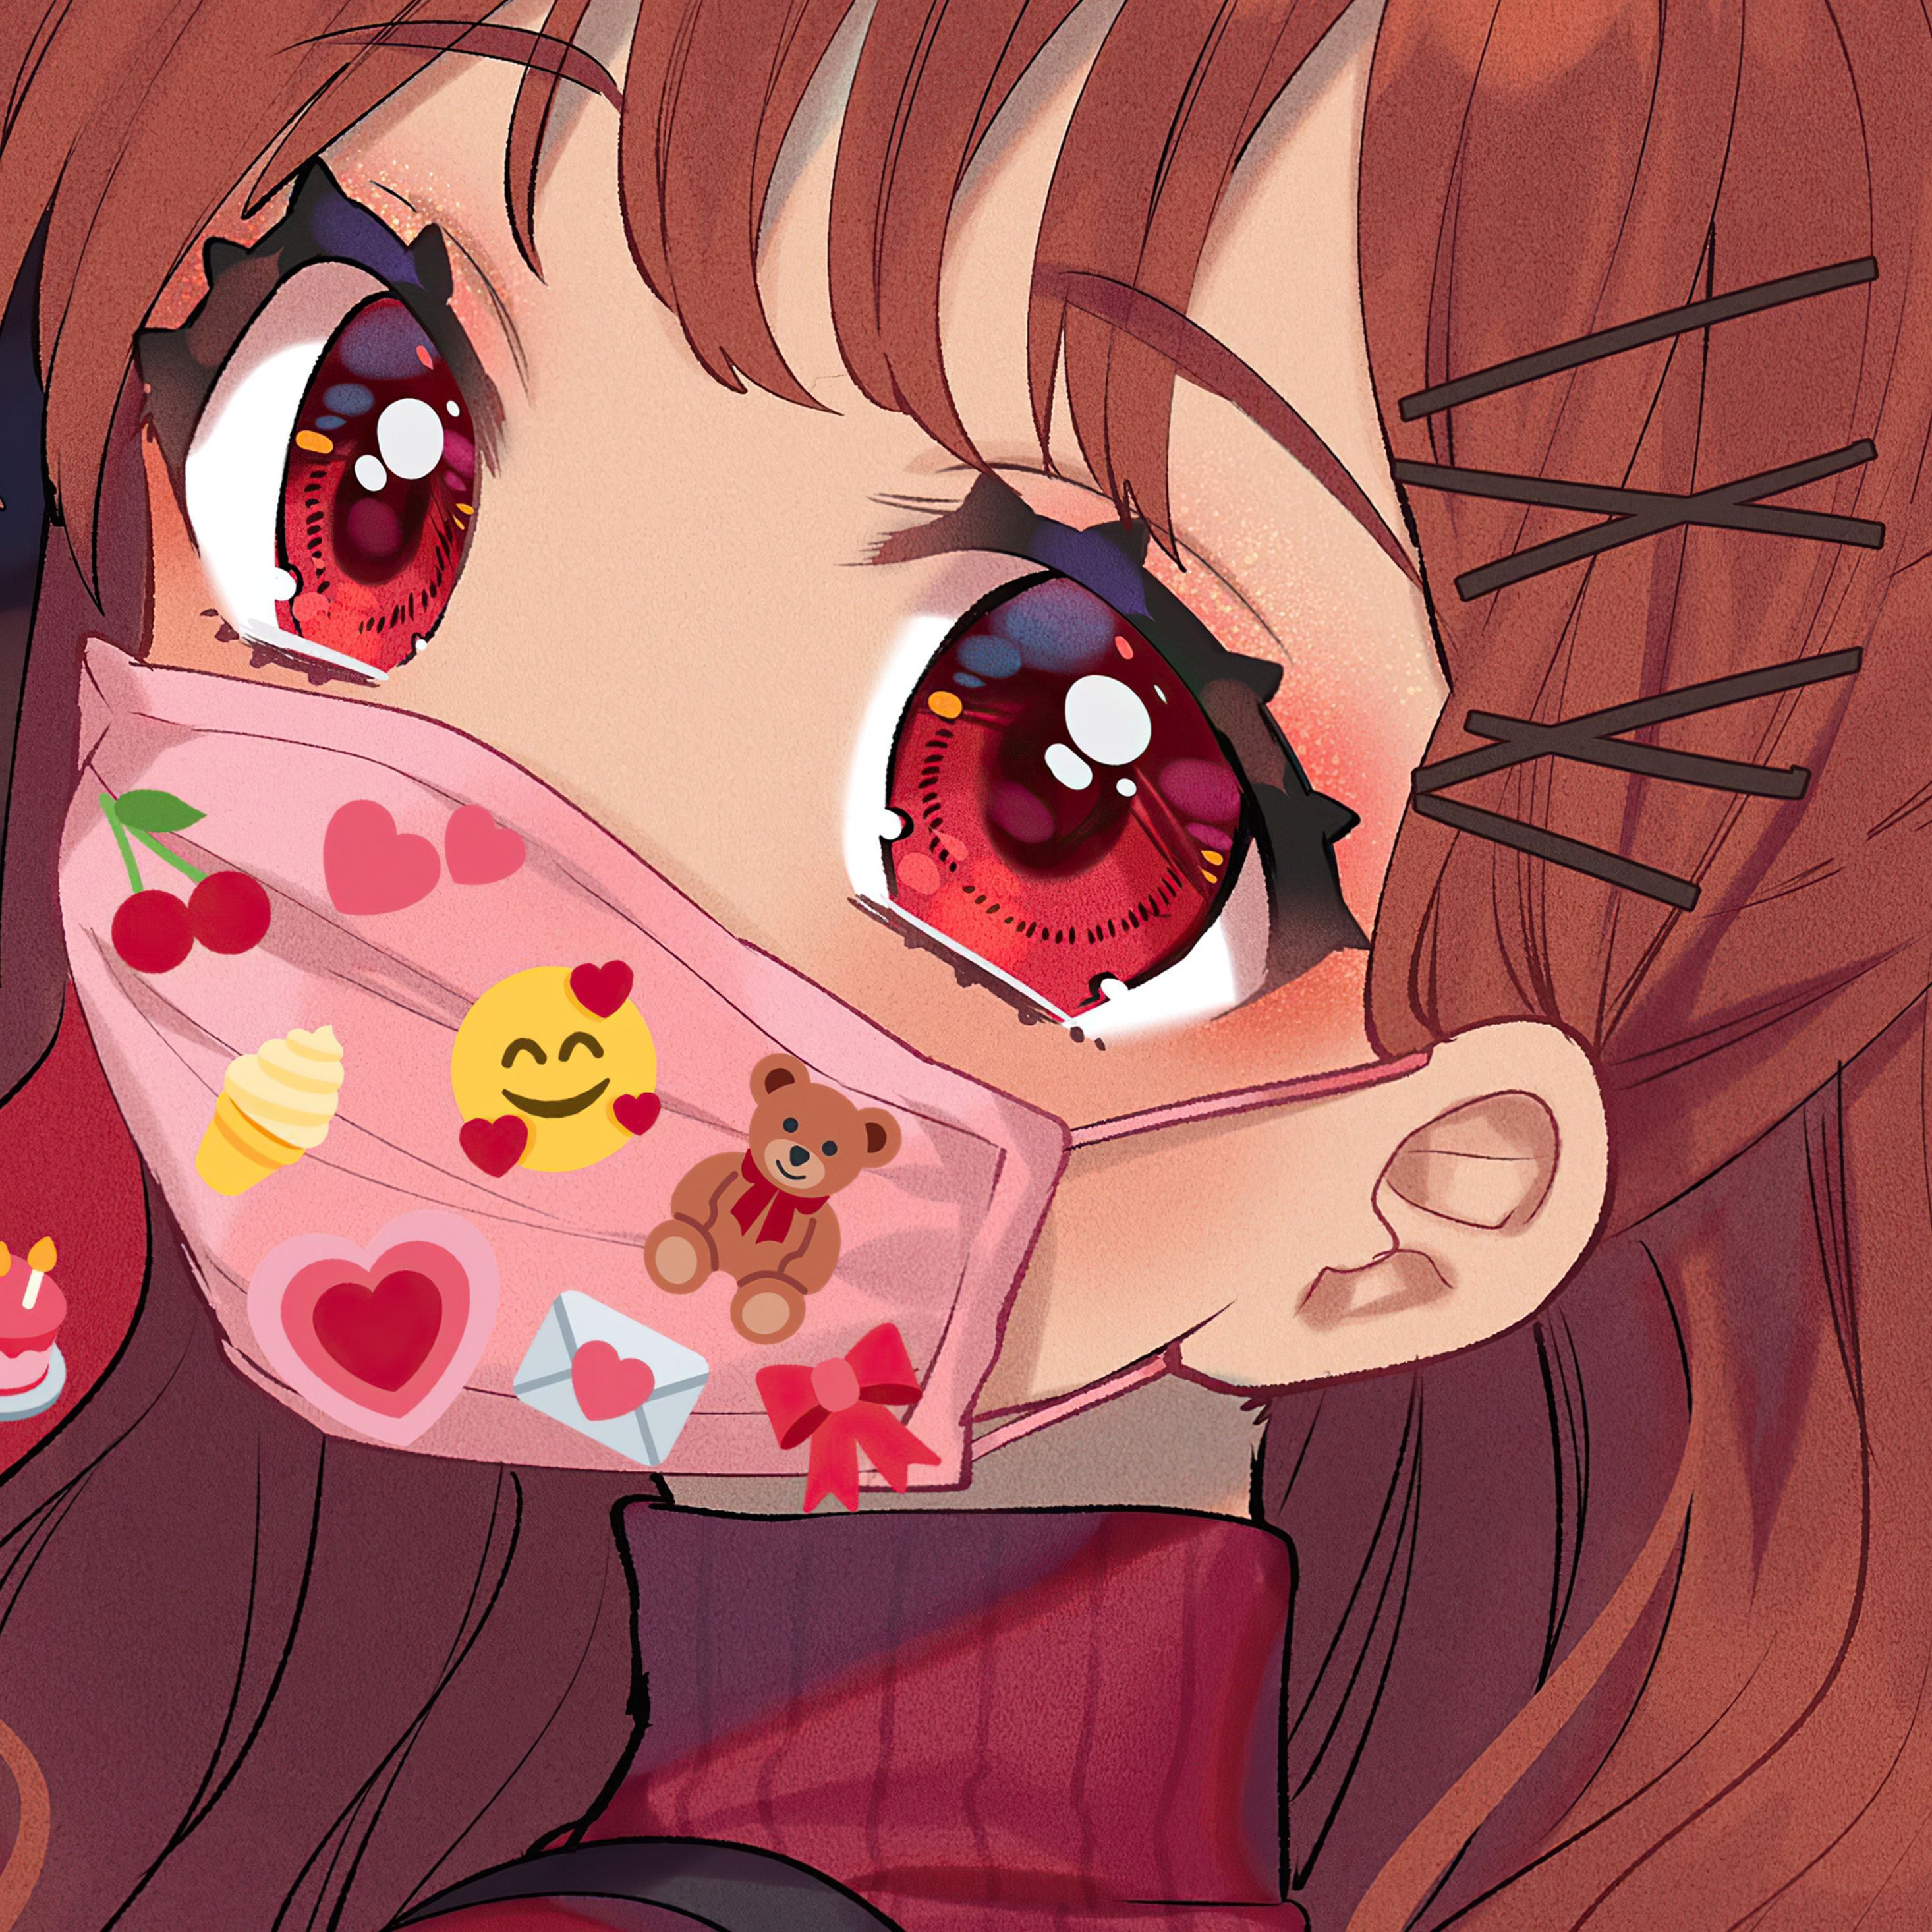 Anime girl with big eyes wearing a mask with hearts and teddy bears. - Eyes